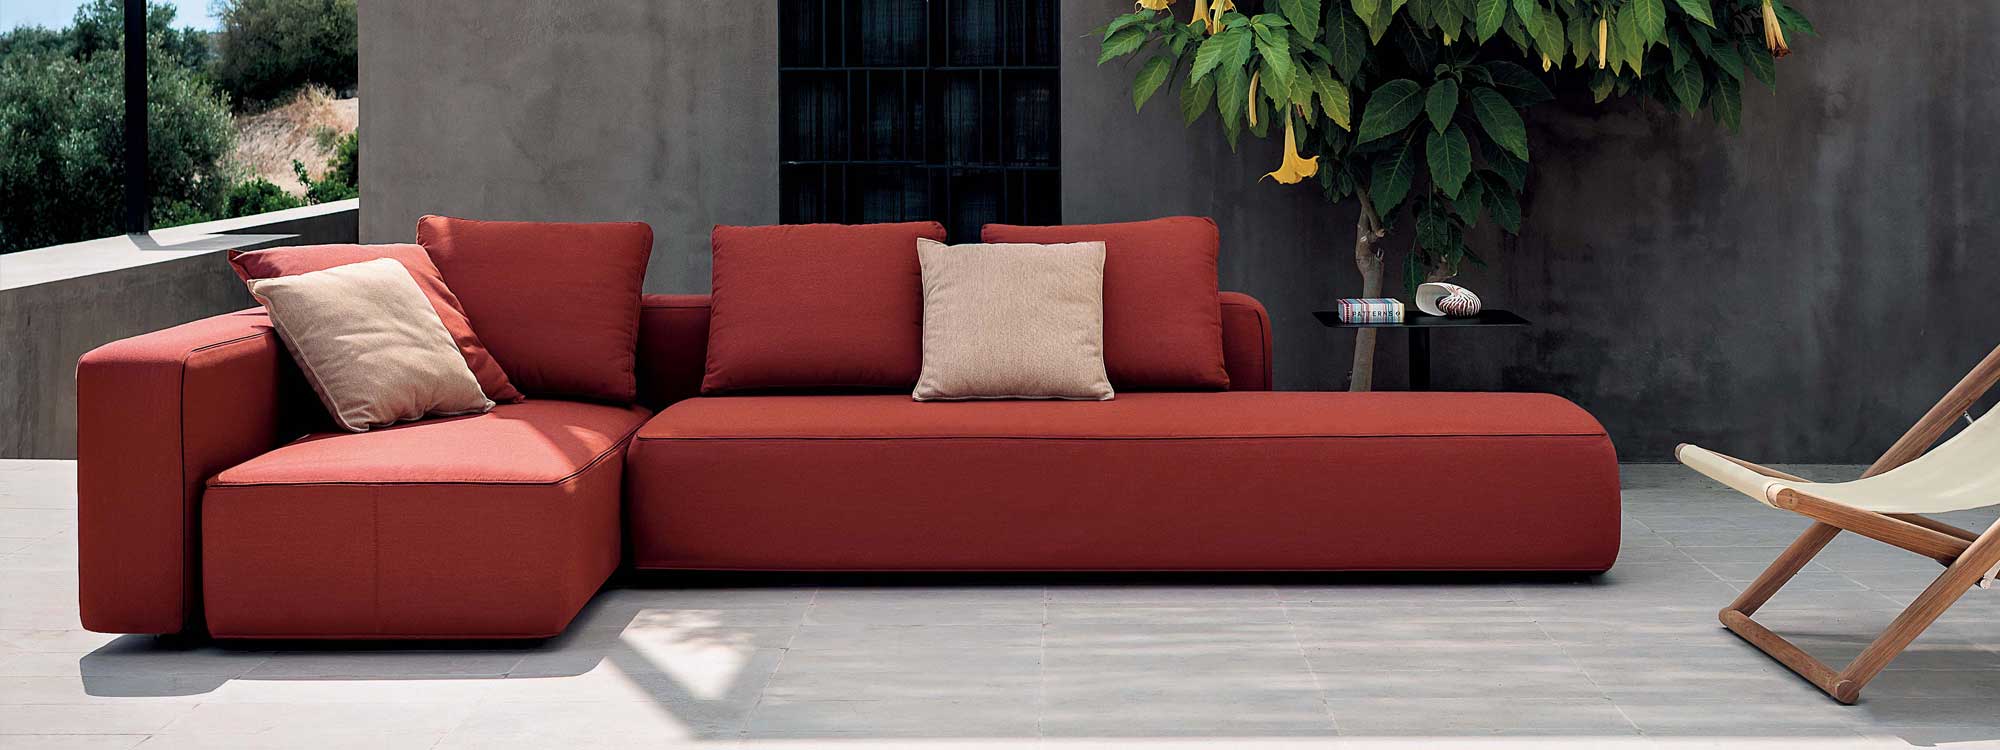 Image of Dandy red upholstered garden sofa on minimalist terrace with tree and poured concrete building in background